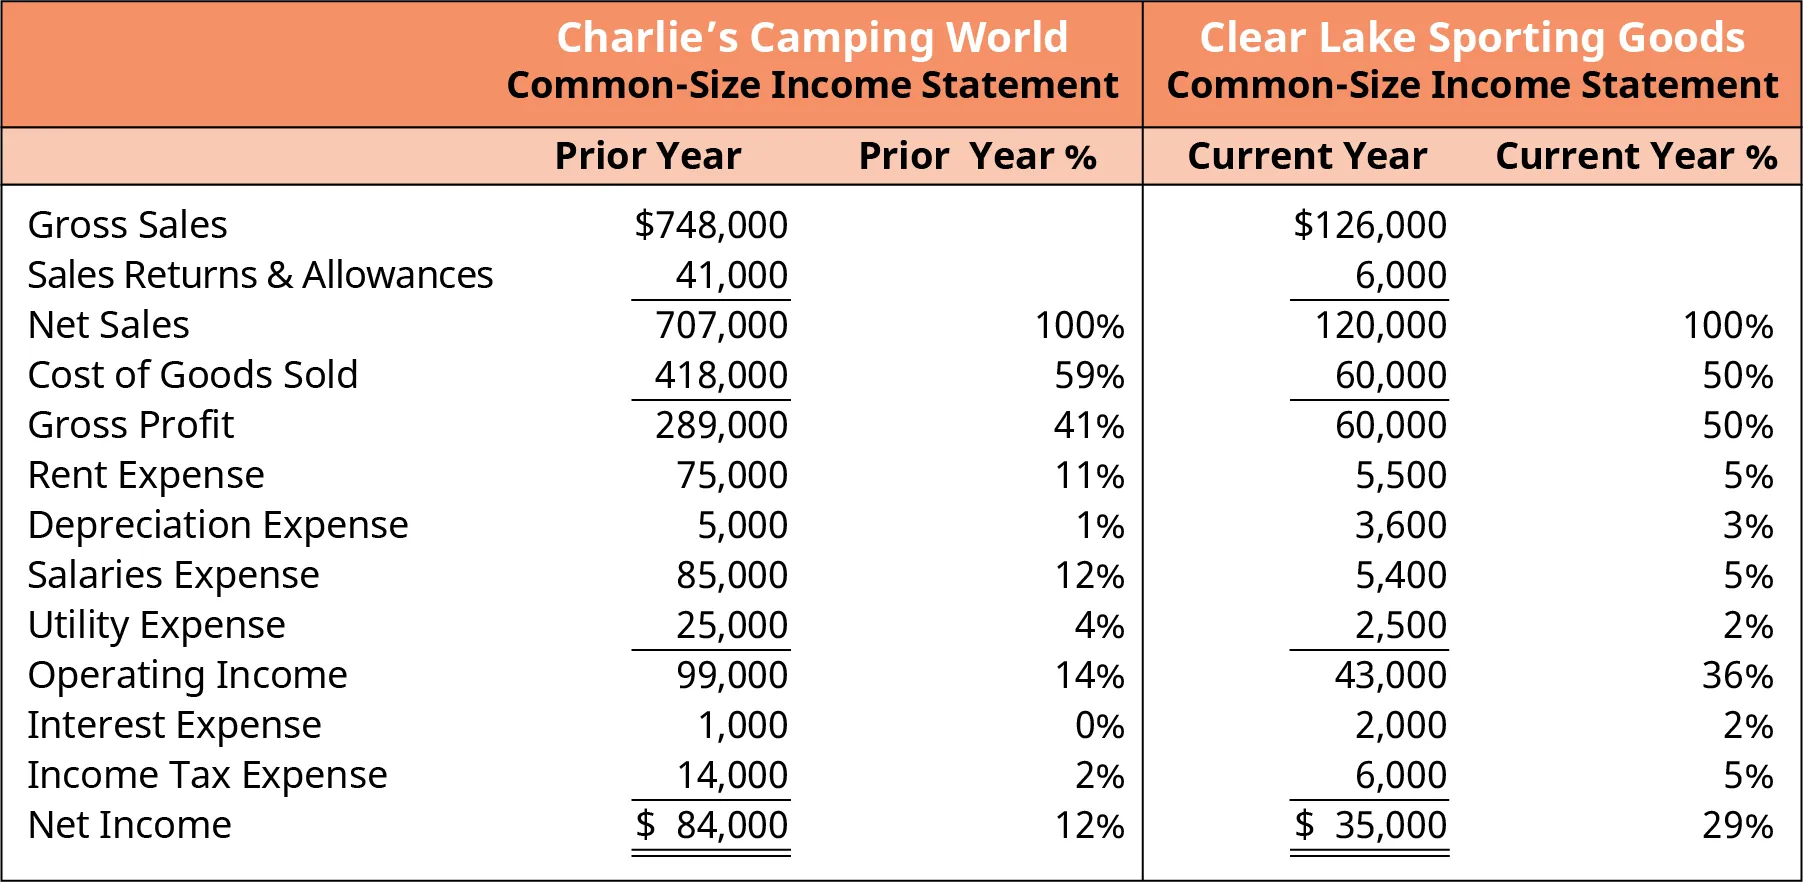 Charlie’s Camping World and Clear Lake Sporting Good Comparison of Common-Size Income Statements. It shows the percentage figures of various assets and liabilities against the total assets and total liabilities for the prior and current years. Clear Lake spends 50% of its sales on cost of goods sold while Charlie spends 59%. Charlie spends 11% of its sales on building rent, while Clear Lake spends only 5%. Depreciation expense is smaller for Charlie. Charlie’s salaries percentage is higher at 12% than Clear Lake’s 5%.